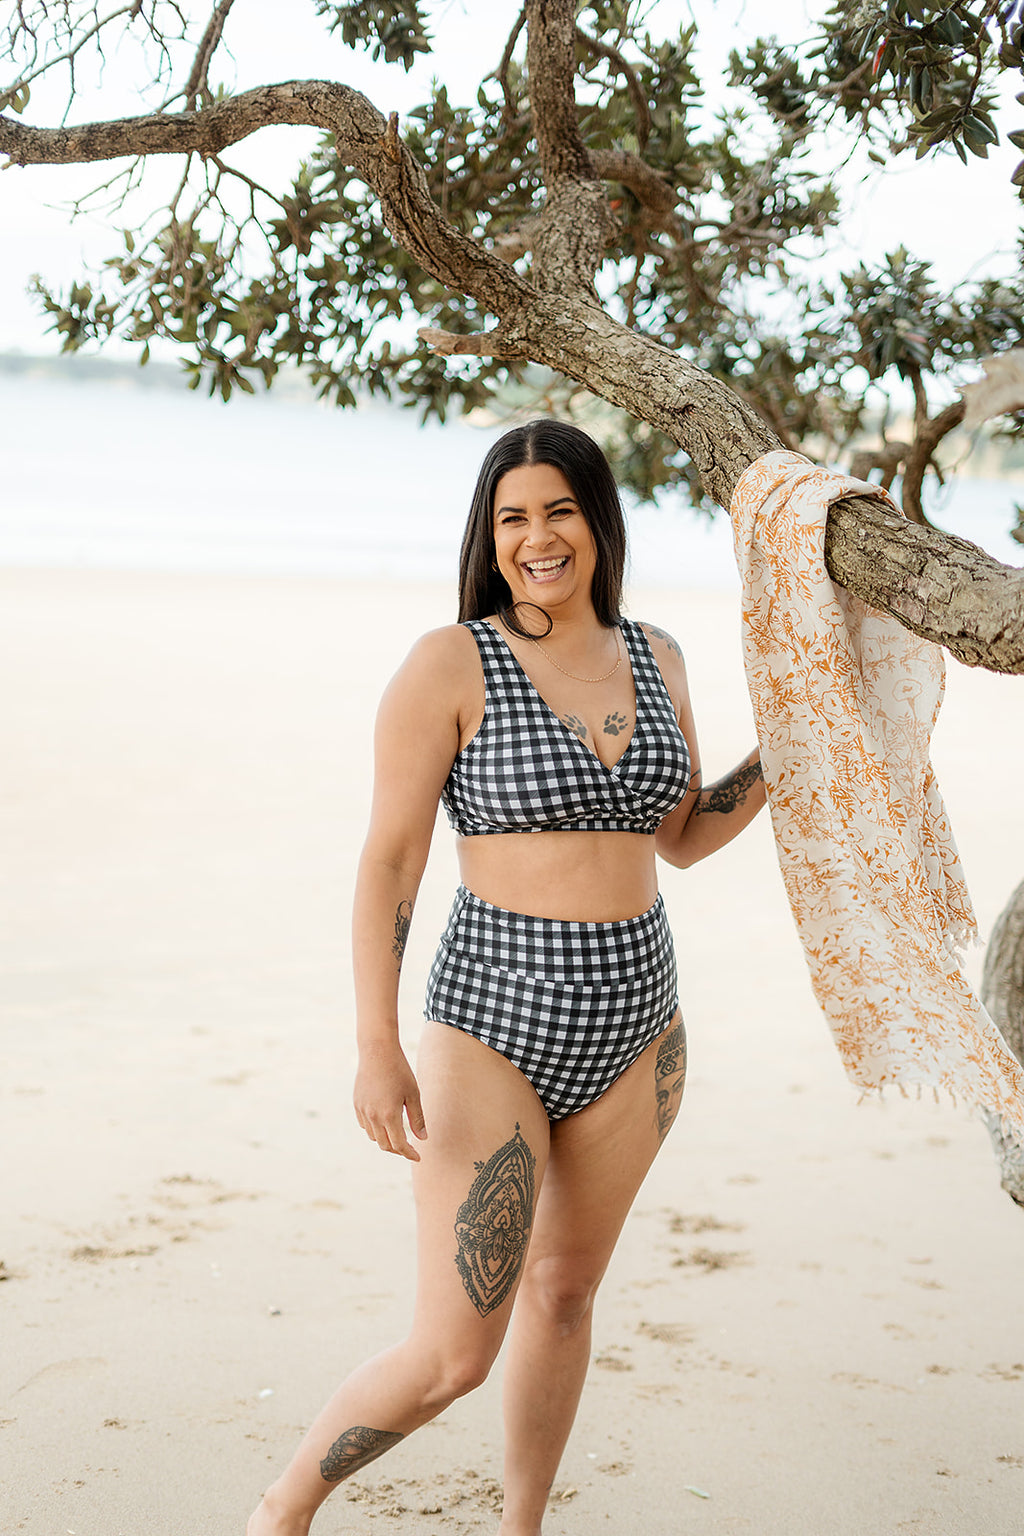 Maternity Swimsuits for sale in Auckland, New Zealand, Facebook  Marketplace